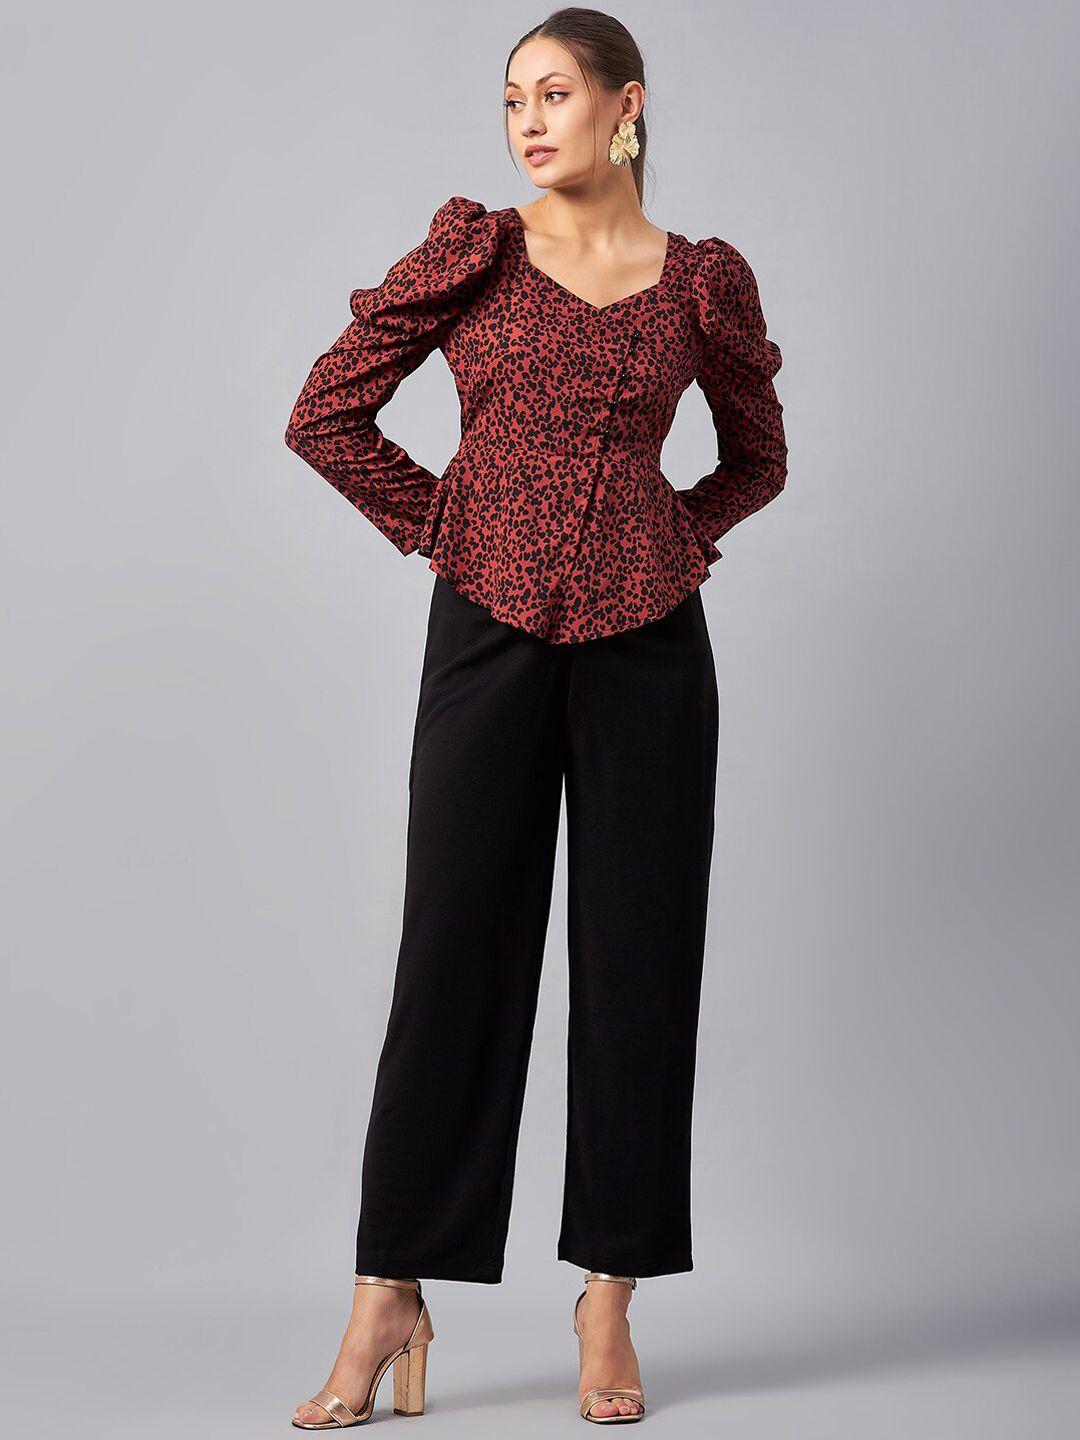 antheaa rust red & black animal printed sweetheart neck top and trousers